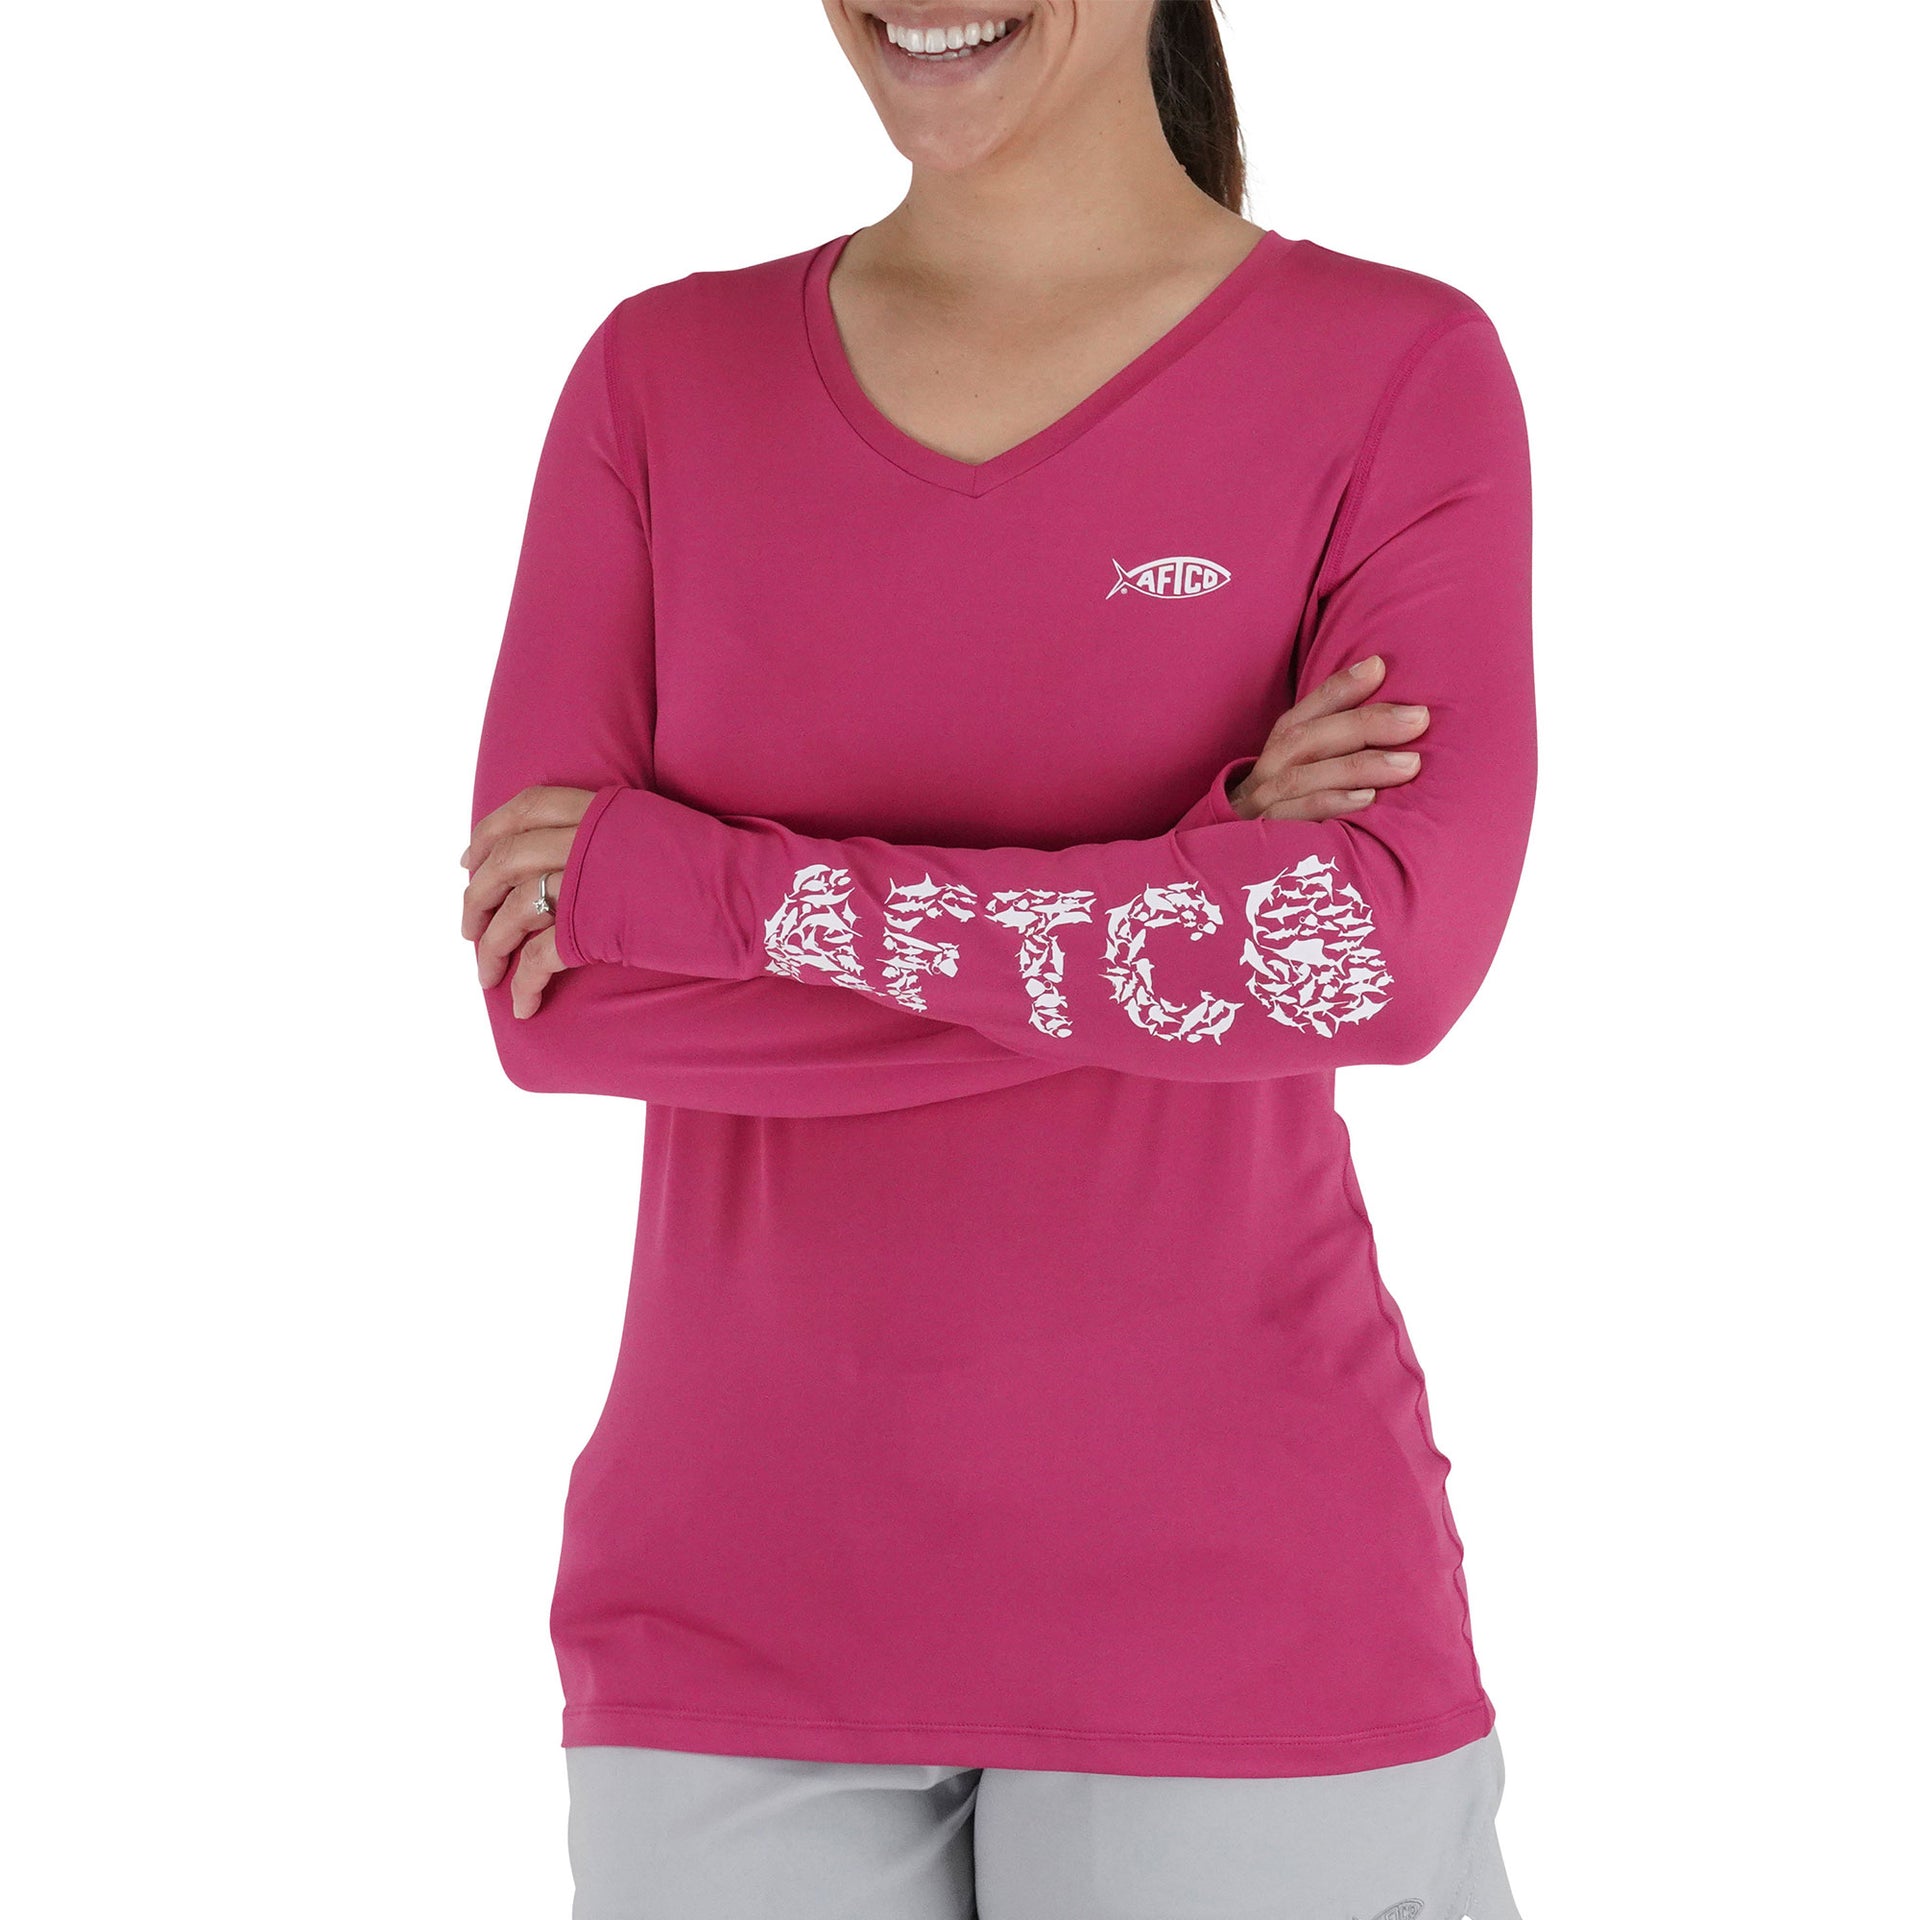 4 t-shirt fluo - Taille S - Training Addict Shop